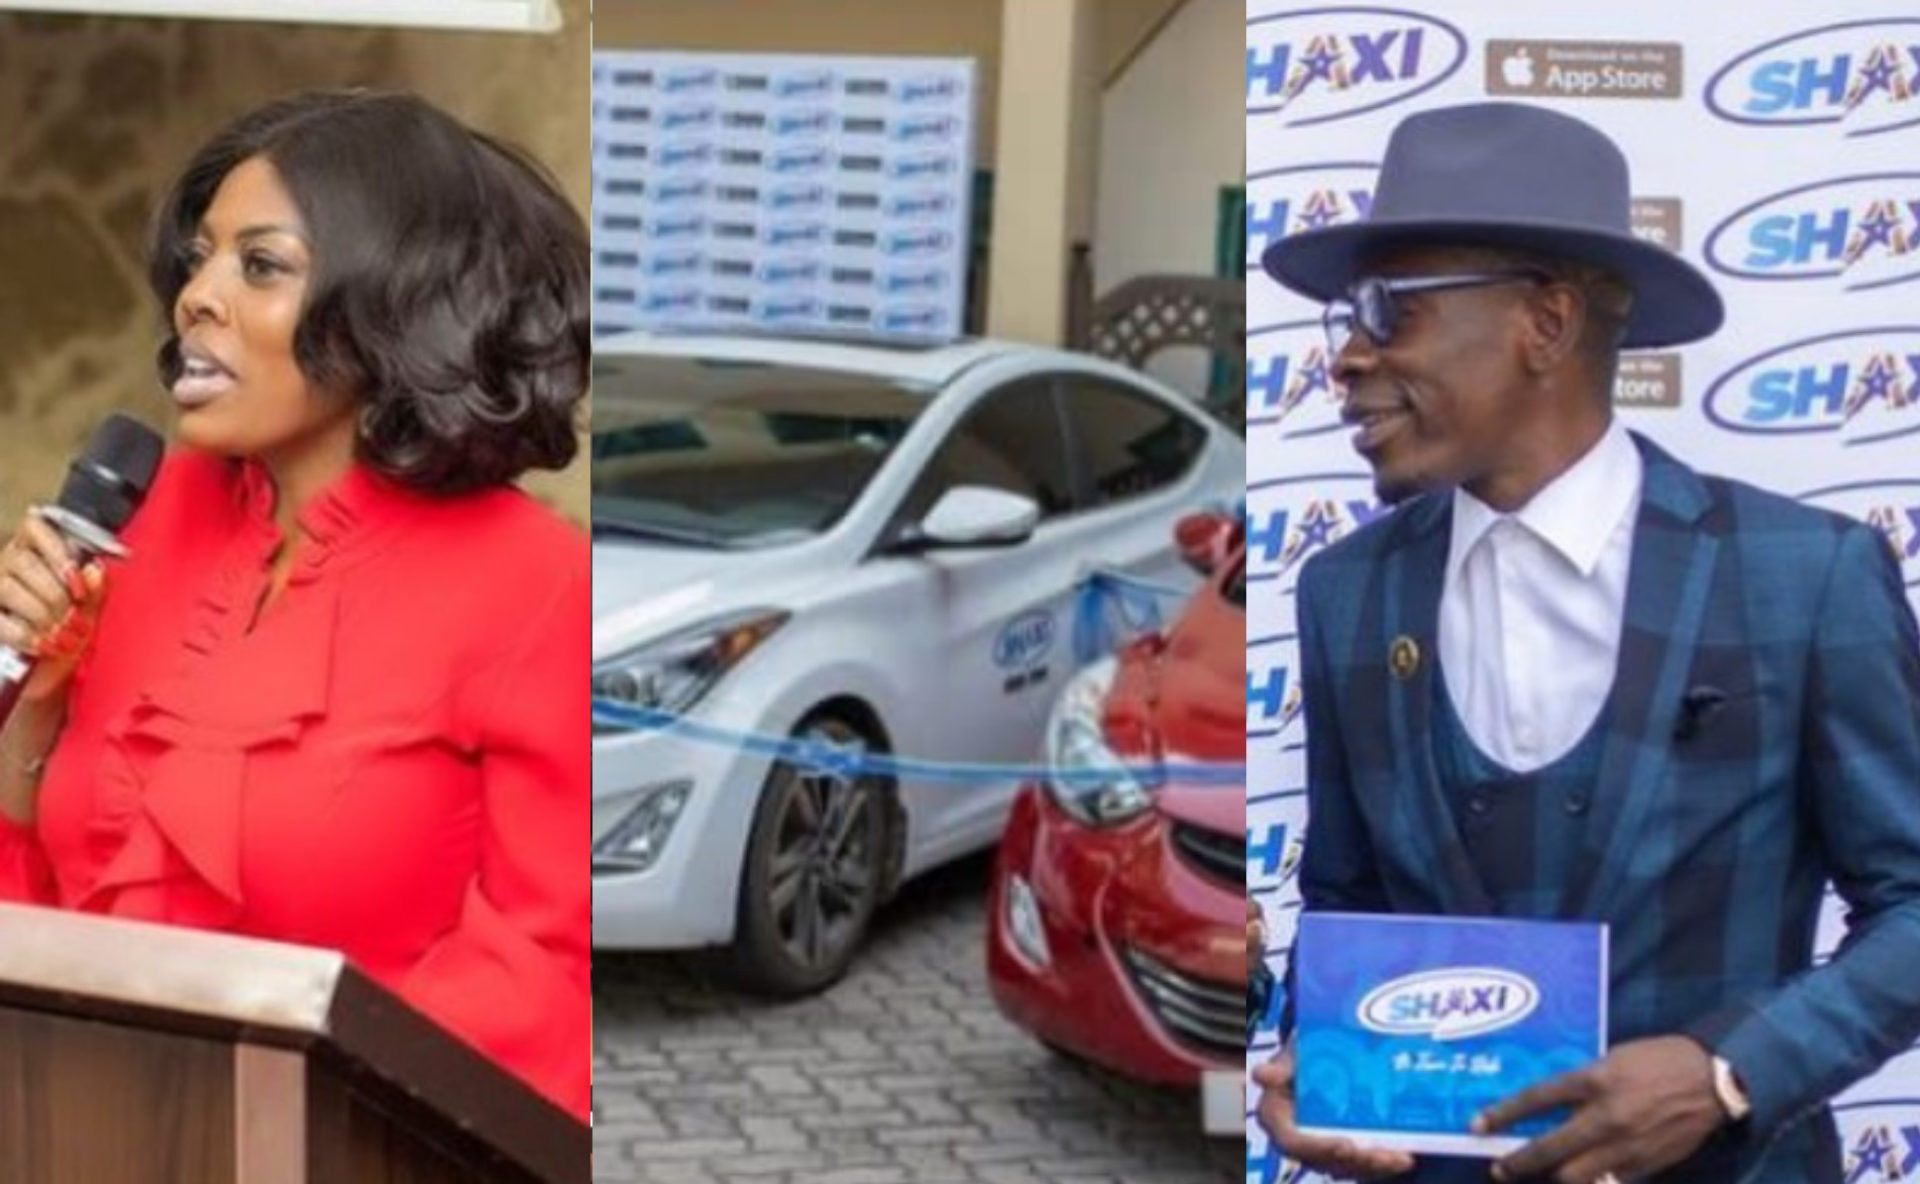  Shatta Wale Thanks Nana Aba Anamoah As She Gifts Him Two Vehicles To Support His ‘Shaxi’ Business